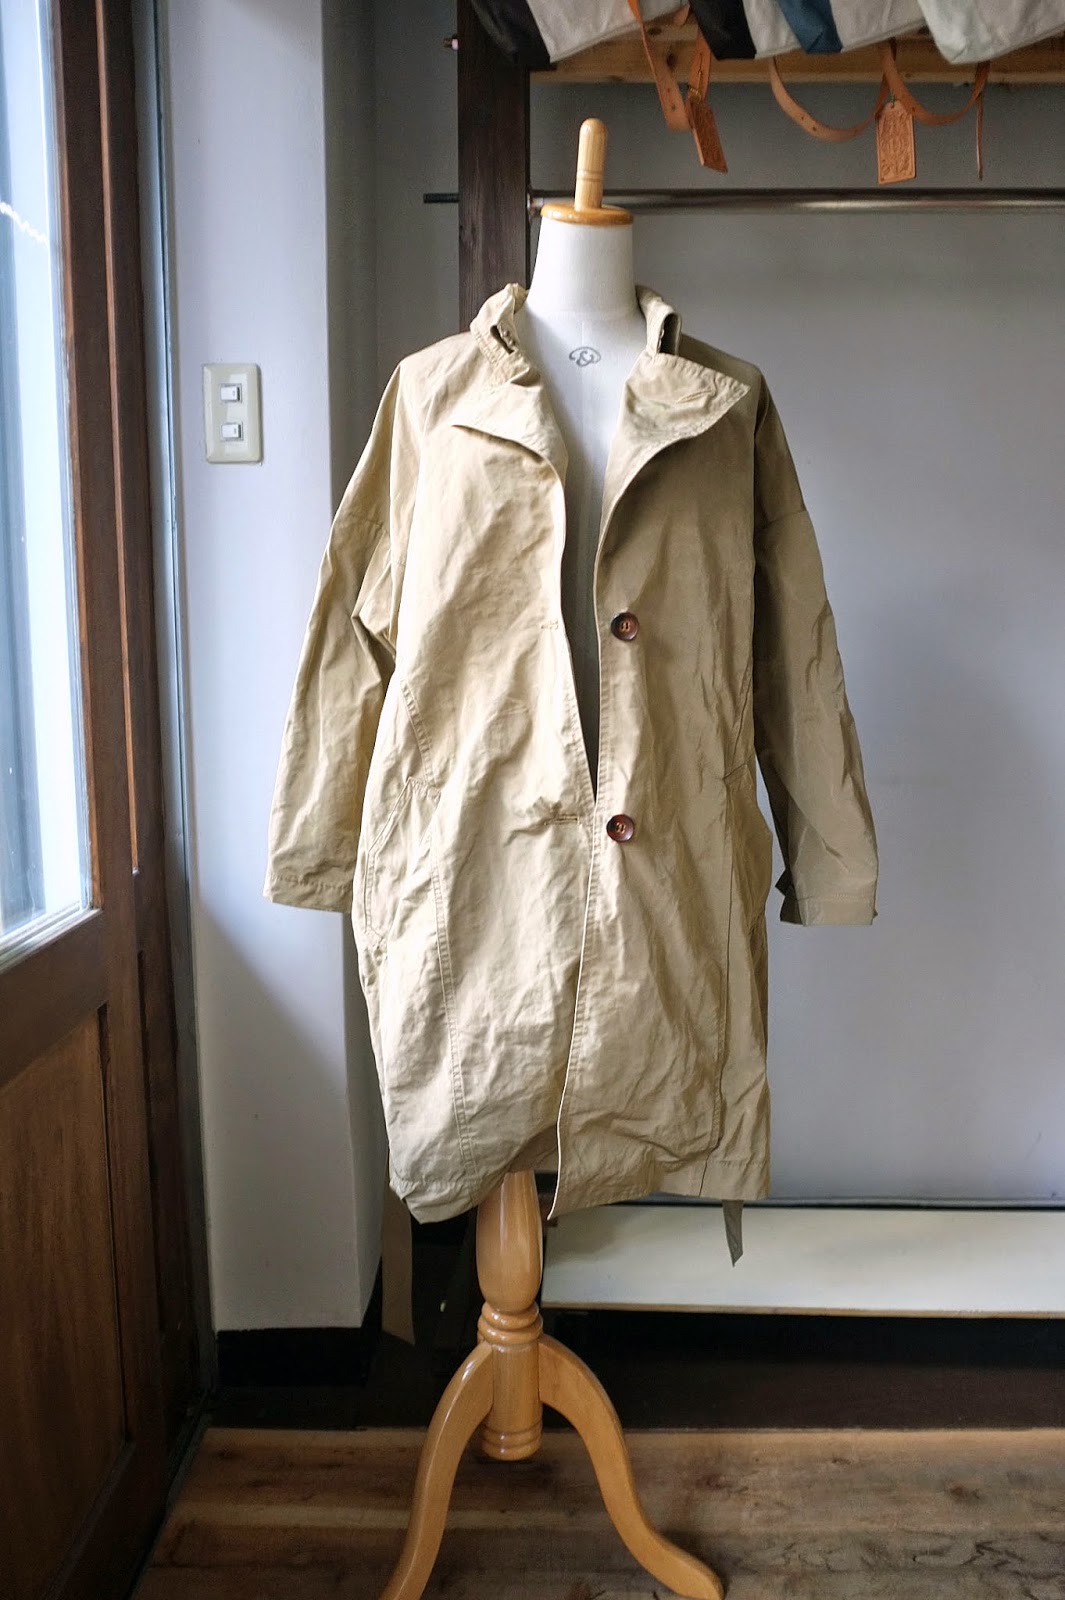 Simon 's&co.: Ordinary fits : TRENCH COAT for women (and about tomorrow)